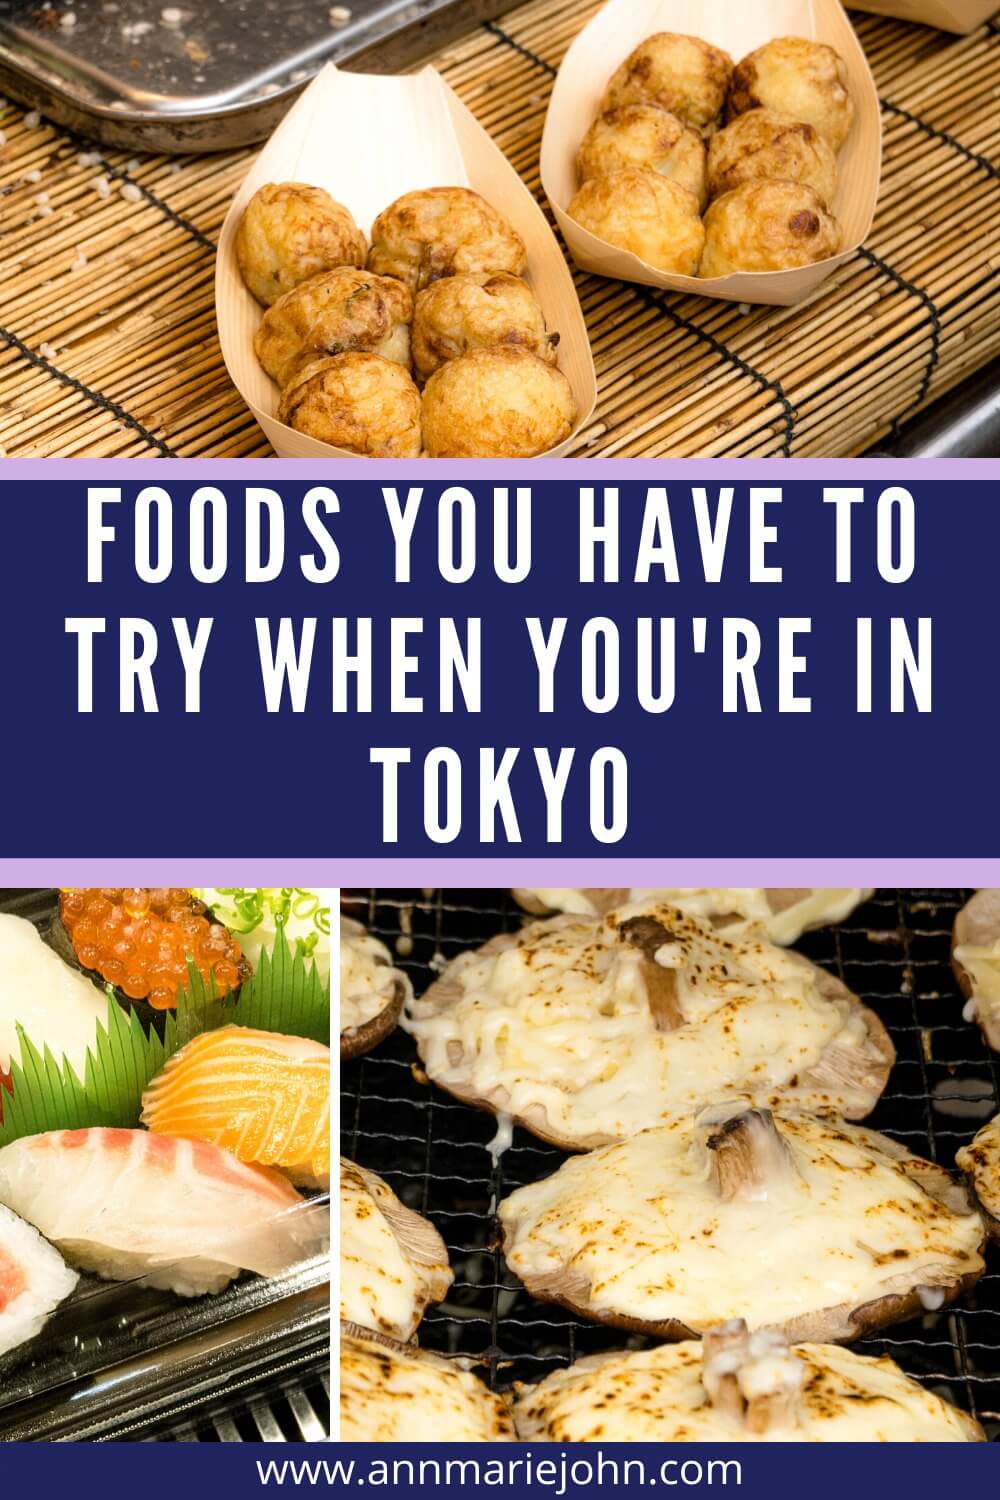 Foods you have to try when you're in Tokyo